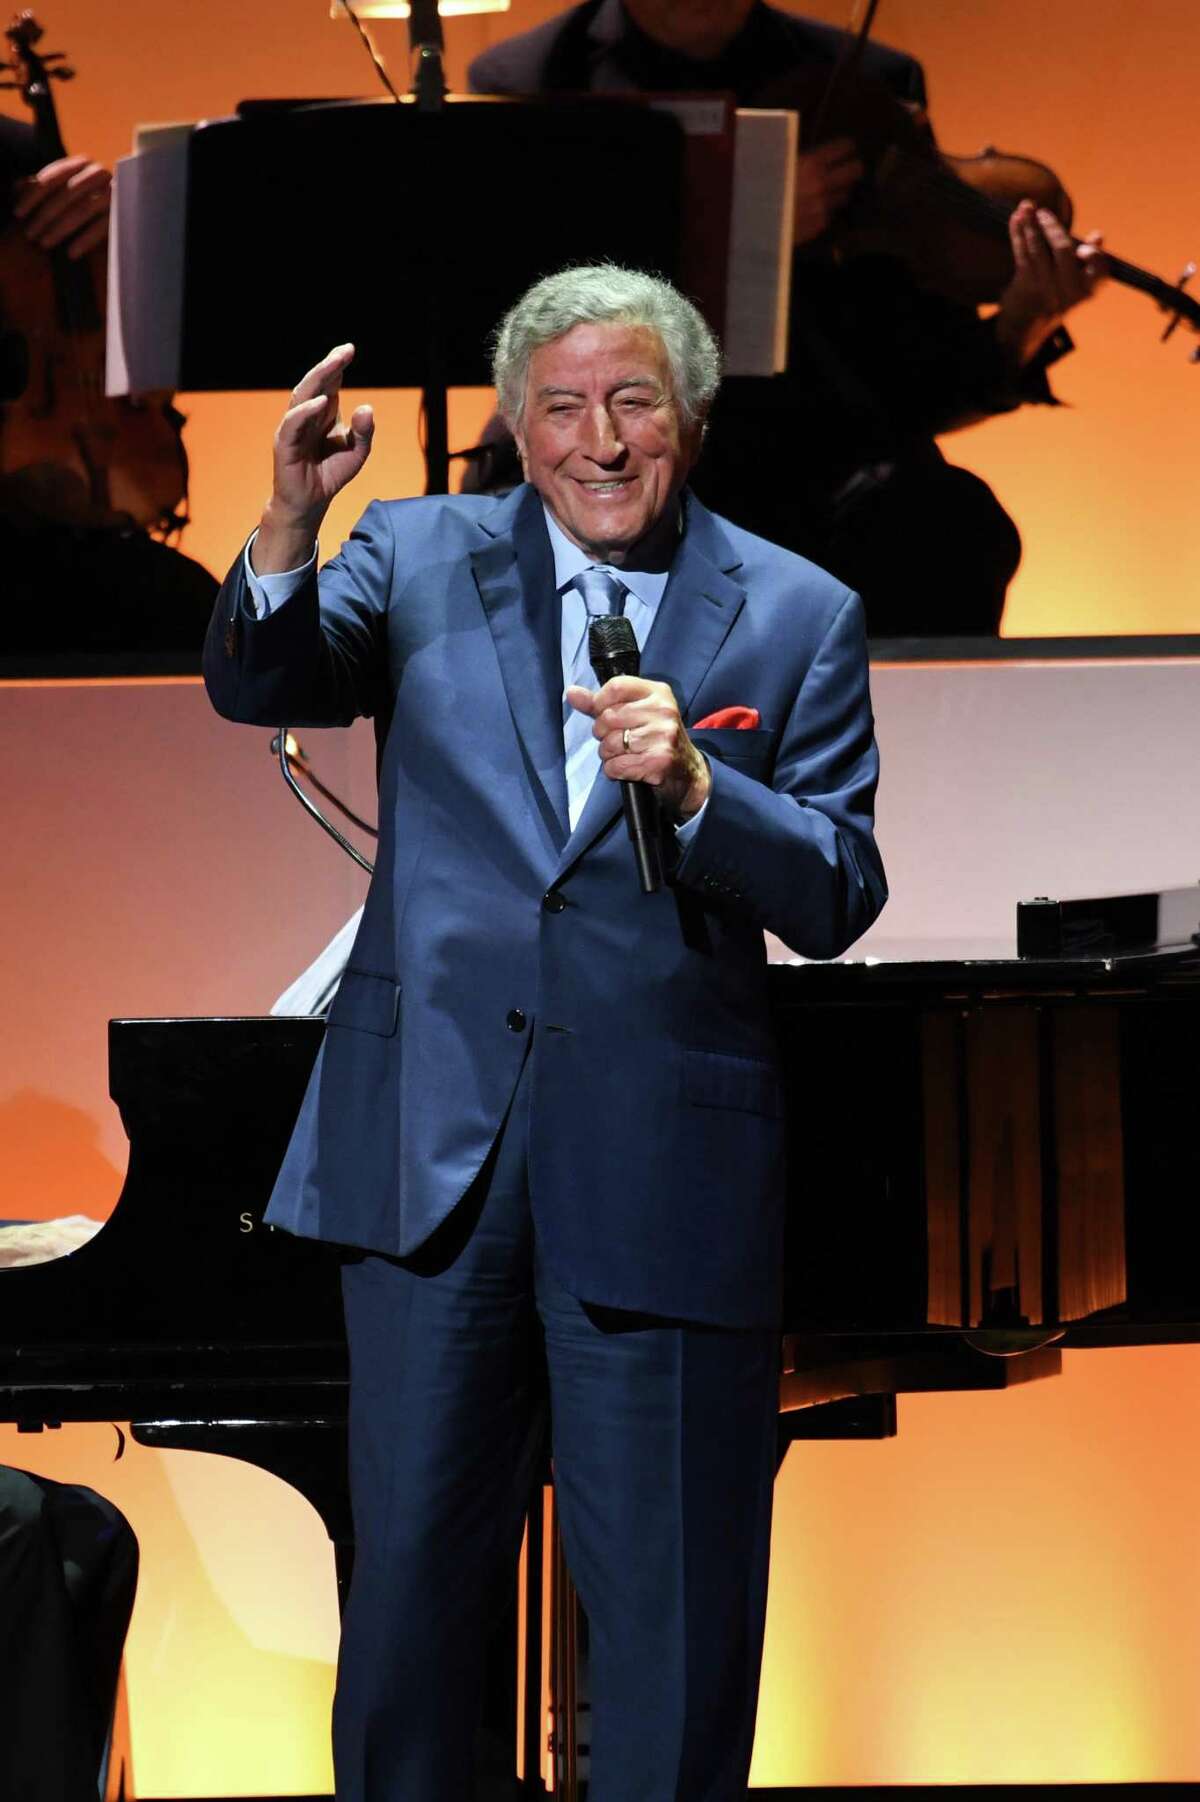 Tony Bennett will perform at Stamford’s Palace Theatre on Oct 22.